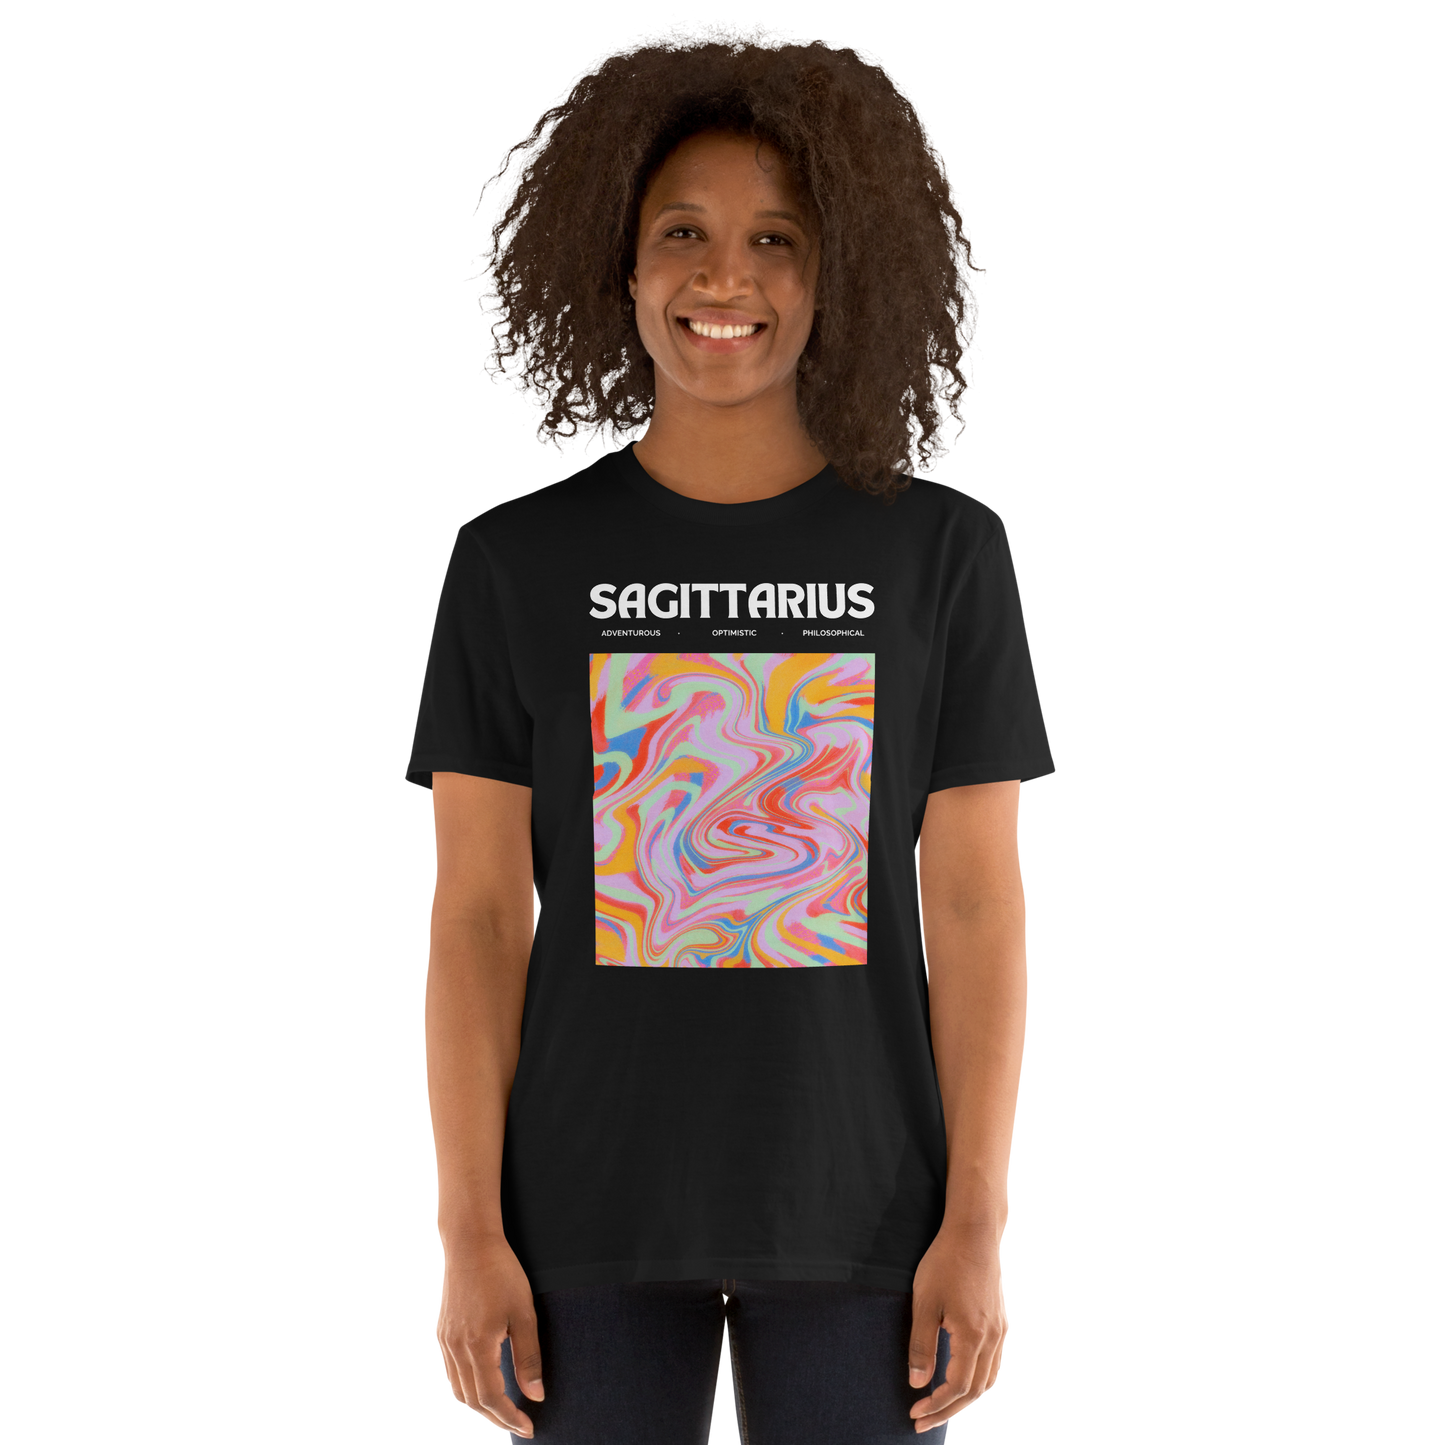 Smiling woman wearing a Black Sagittarius T-Shirt featuring an Abstract Sagittarius Star Sign graphic on the chest - Cool Graphic Zodiac T-Shirts - Boozy Fox